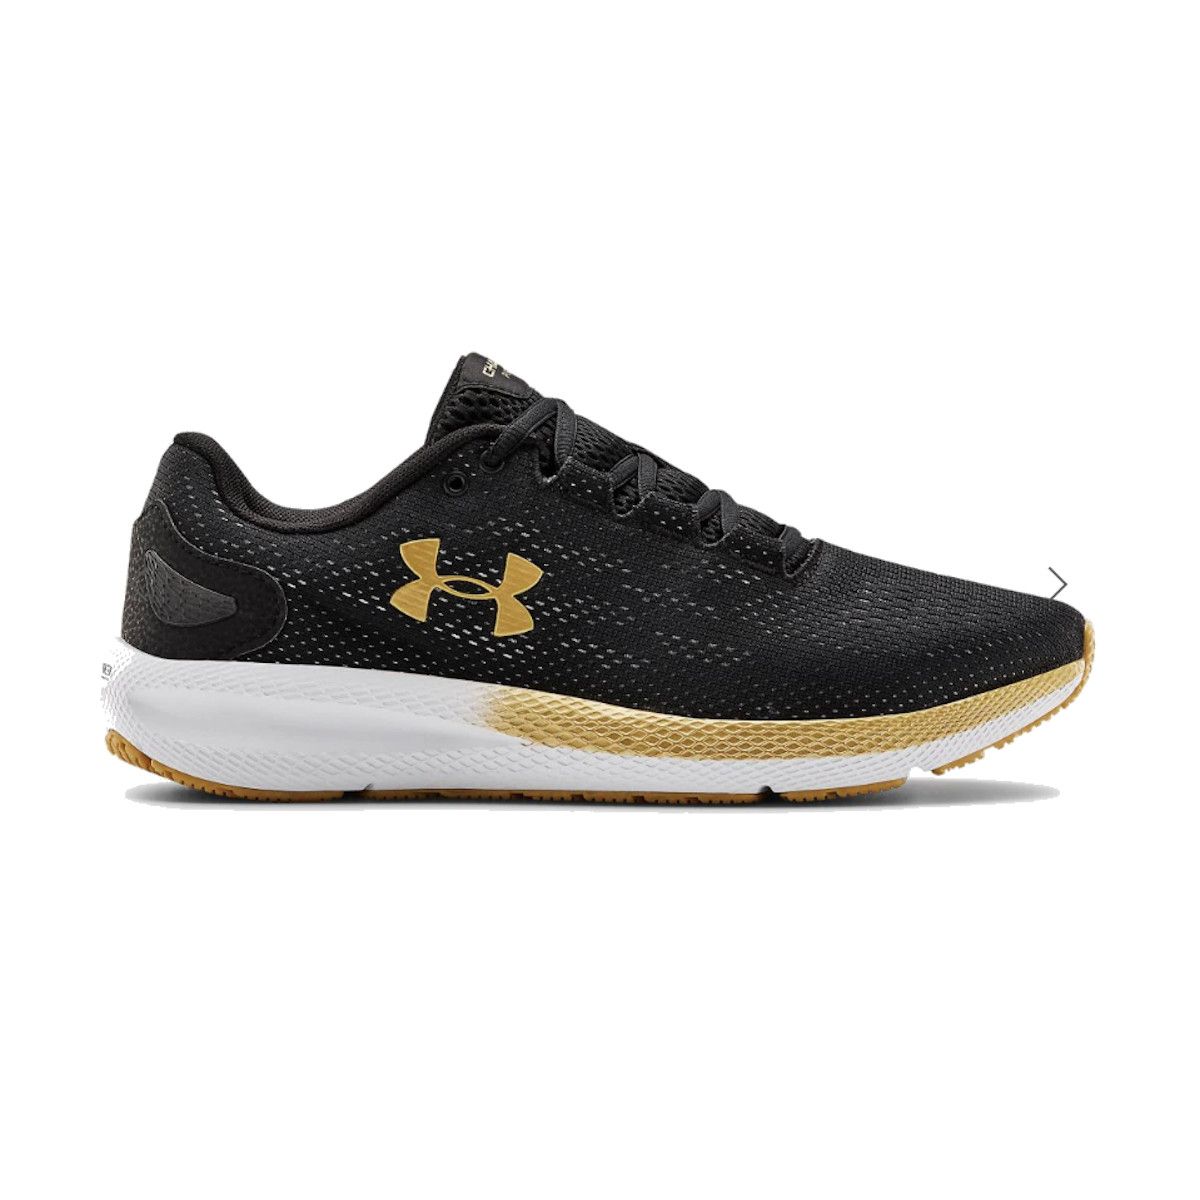 Under Armour Charged Pursuit 2 Men's Running Shoes 3022594-0